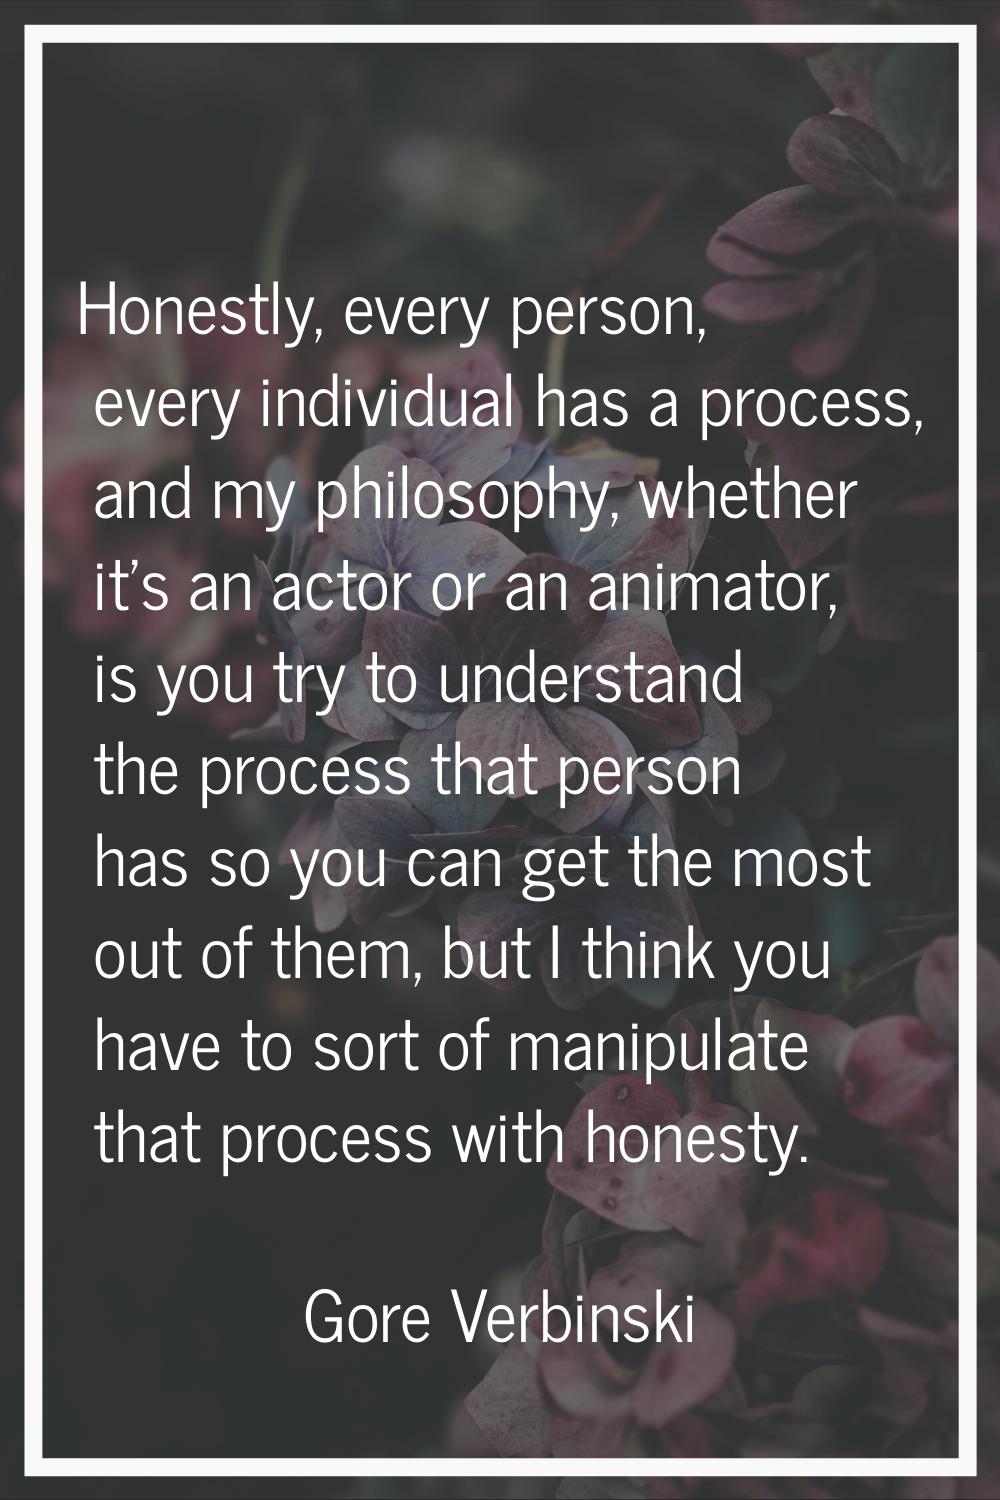 Honestly, every person, every individual has a process, and my philosophy, whether it's an actor or